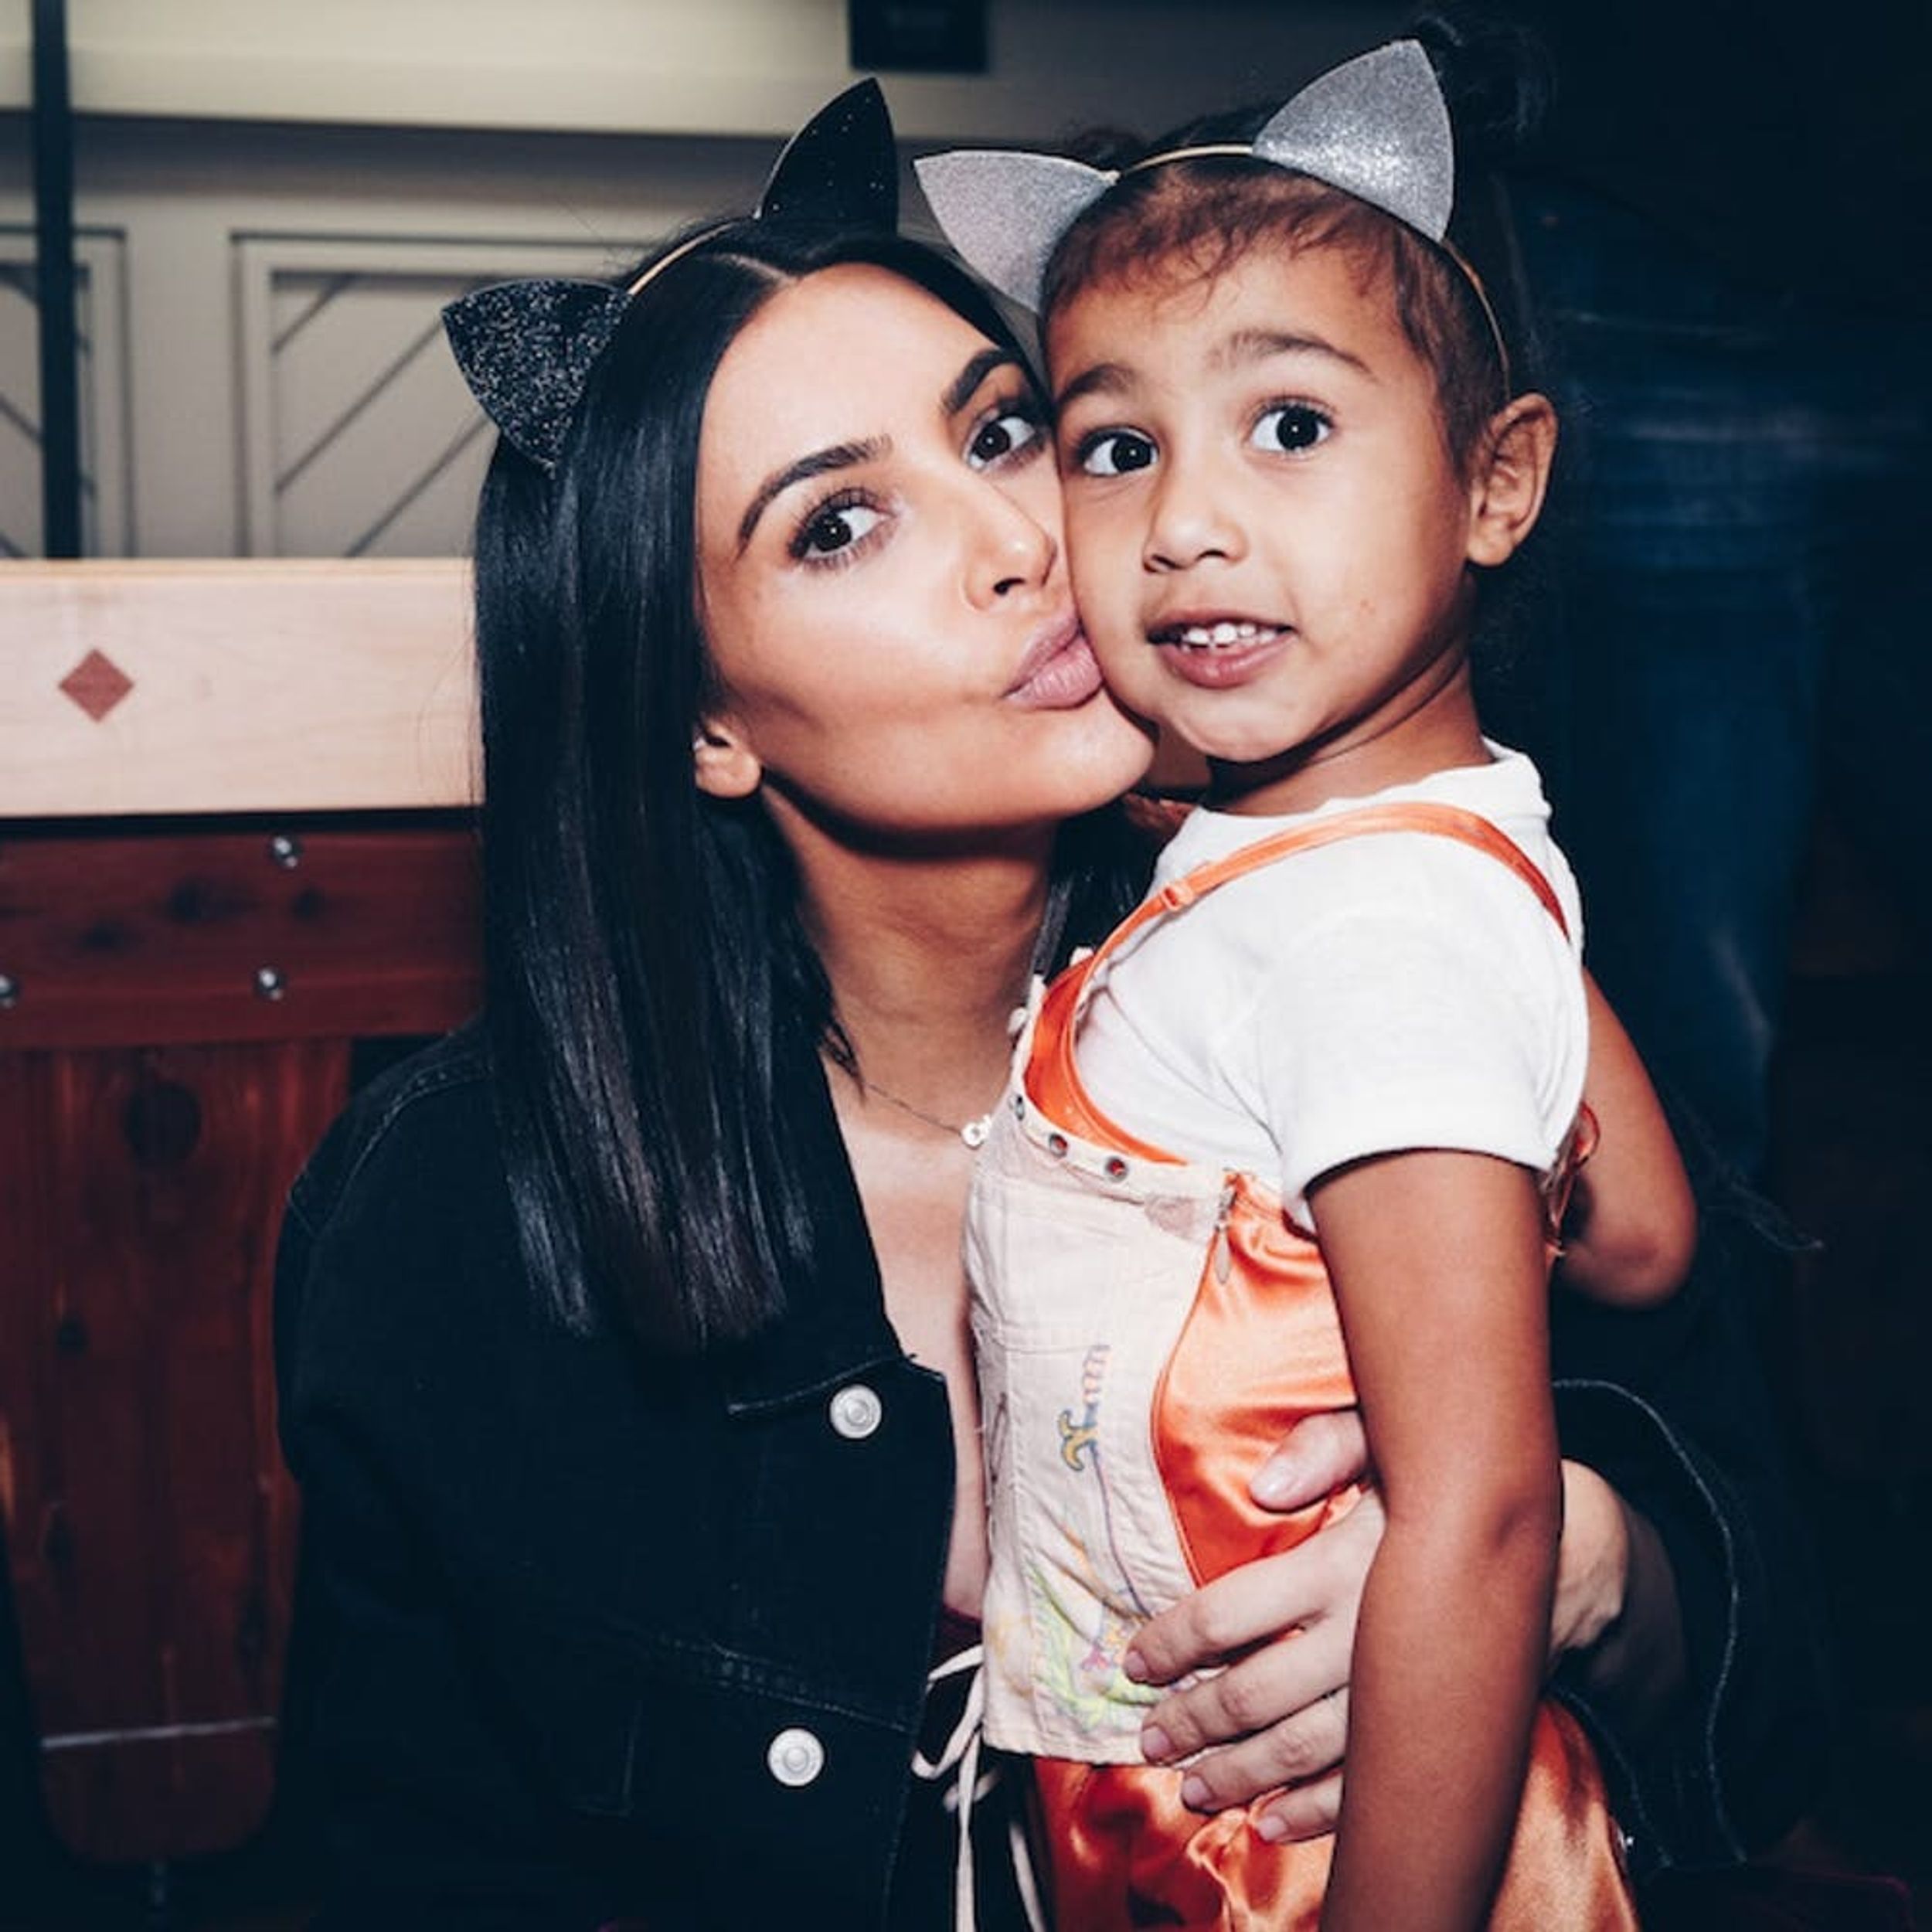 North West Was Spotted Carrying a $3450 Handbag to Church